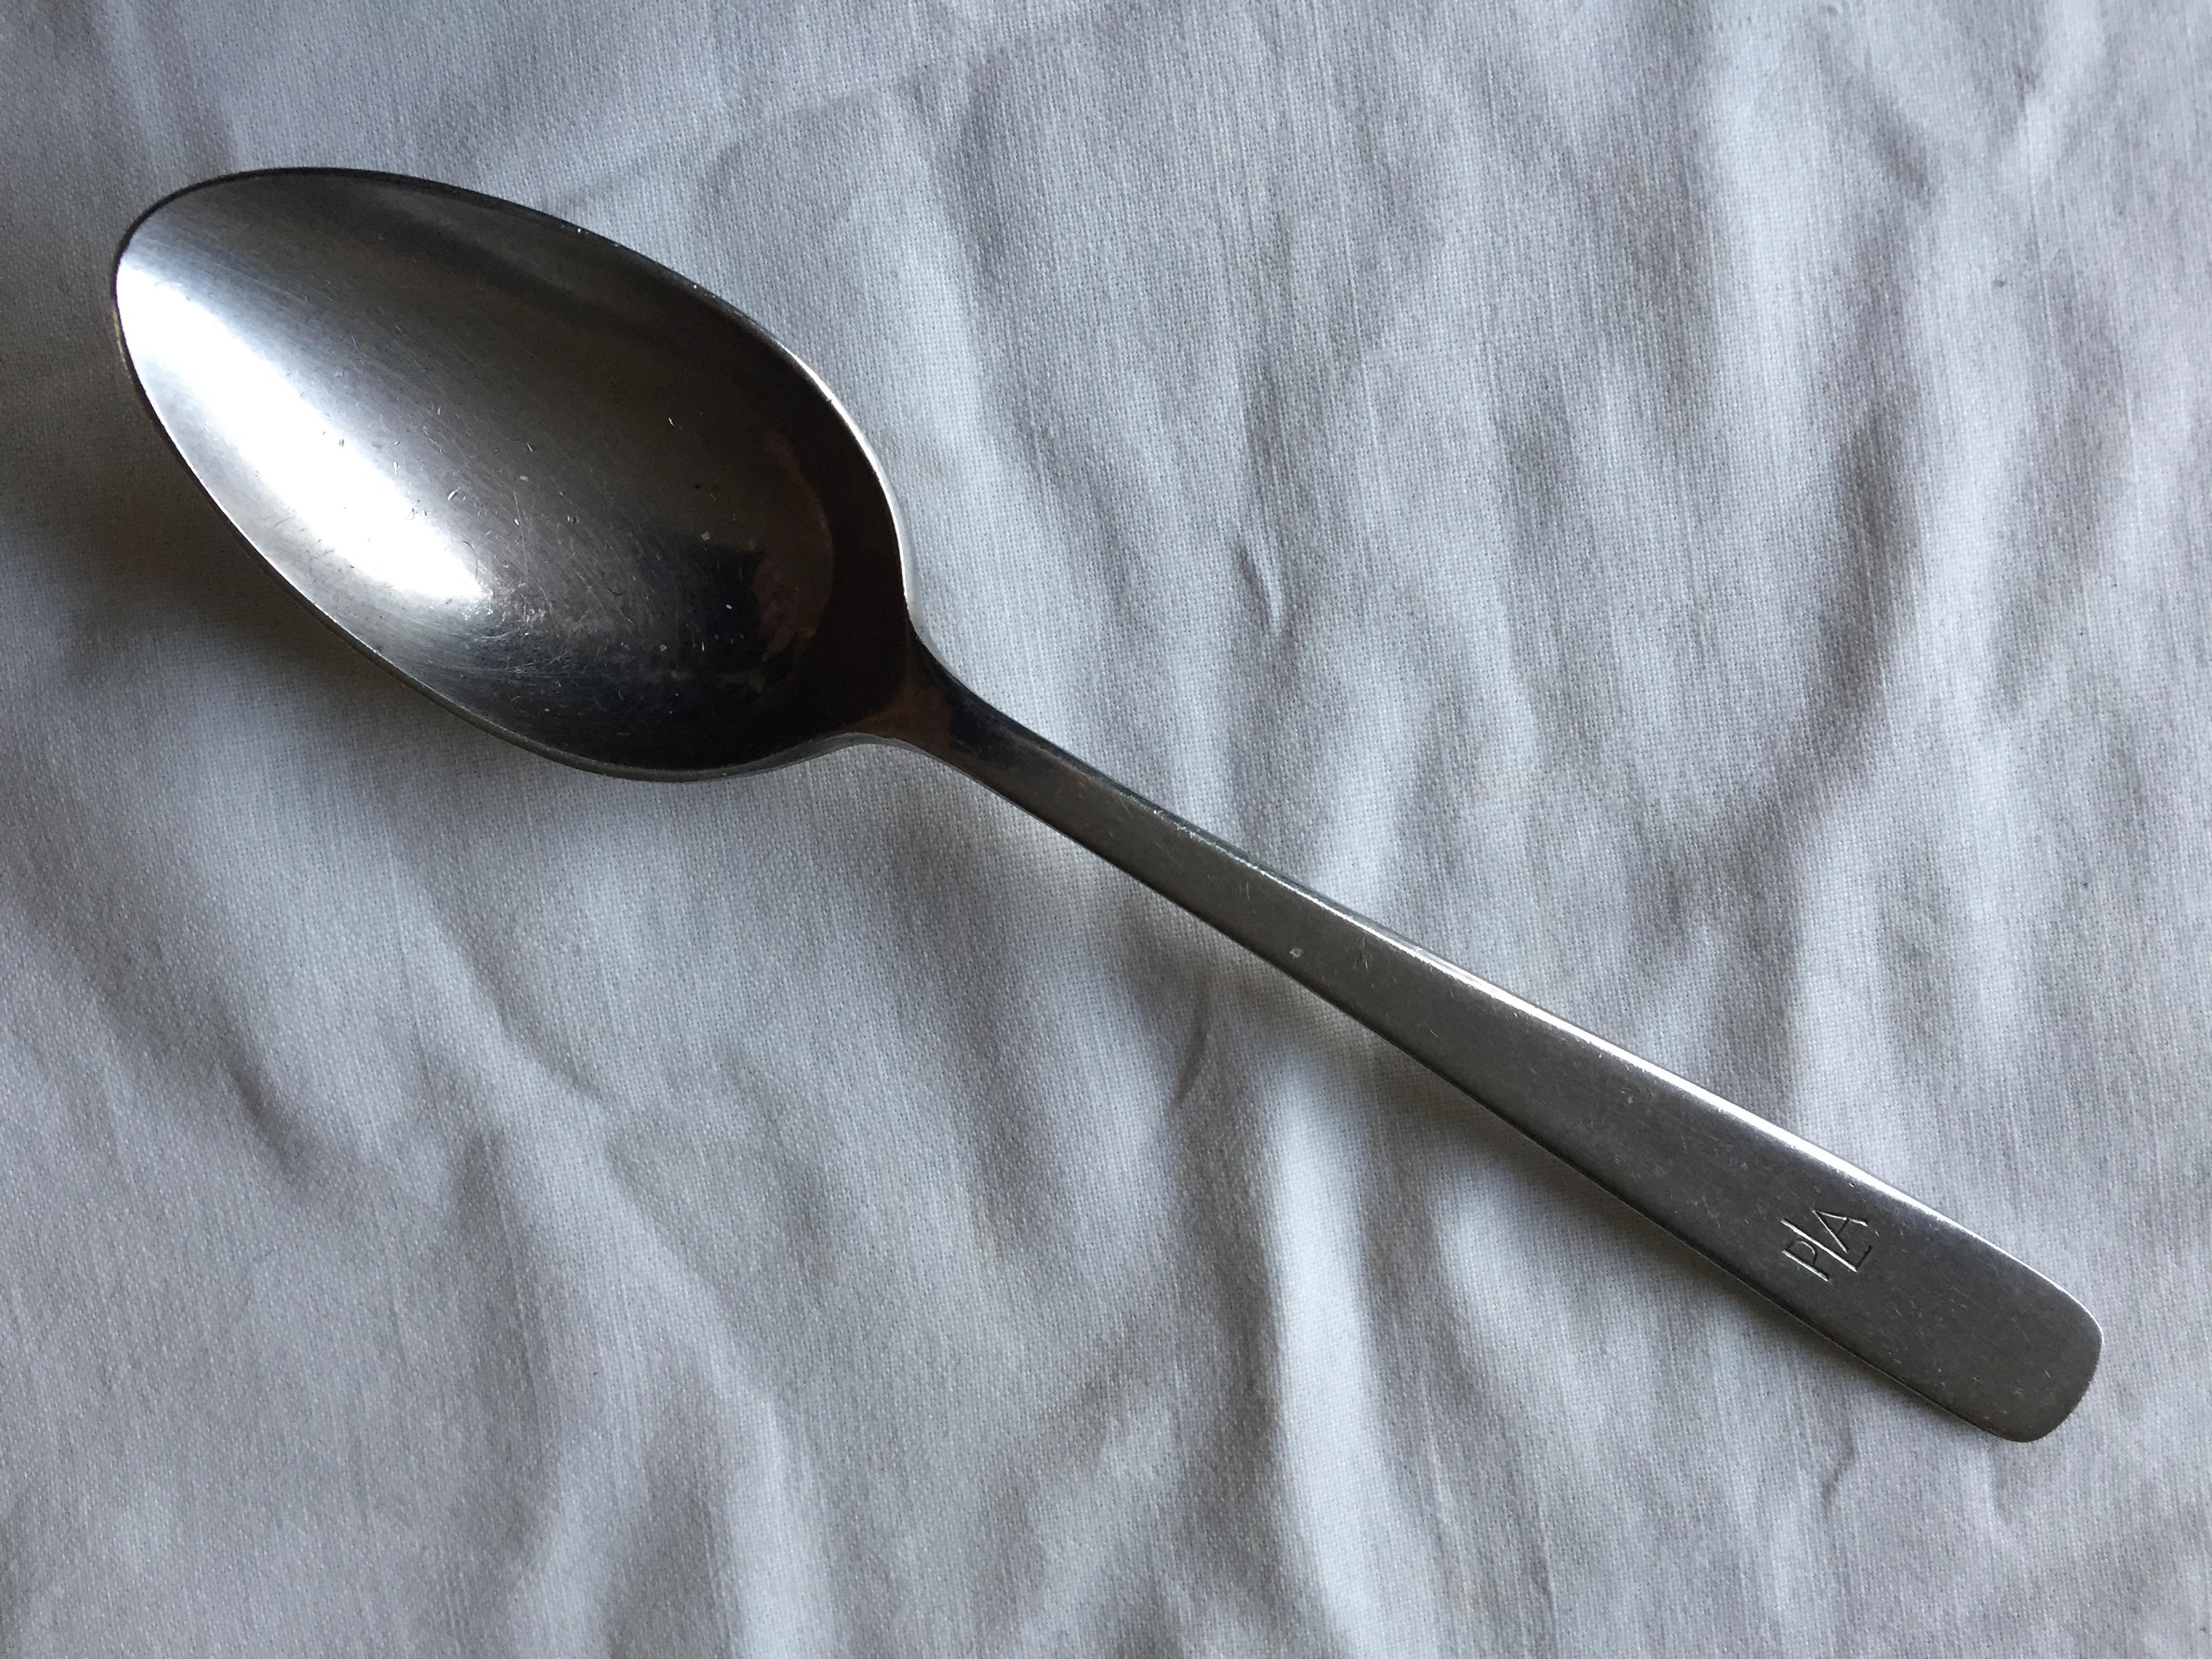 DESSERT SPOON FROM THE PORT OF LONDON AUTHORITY